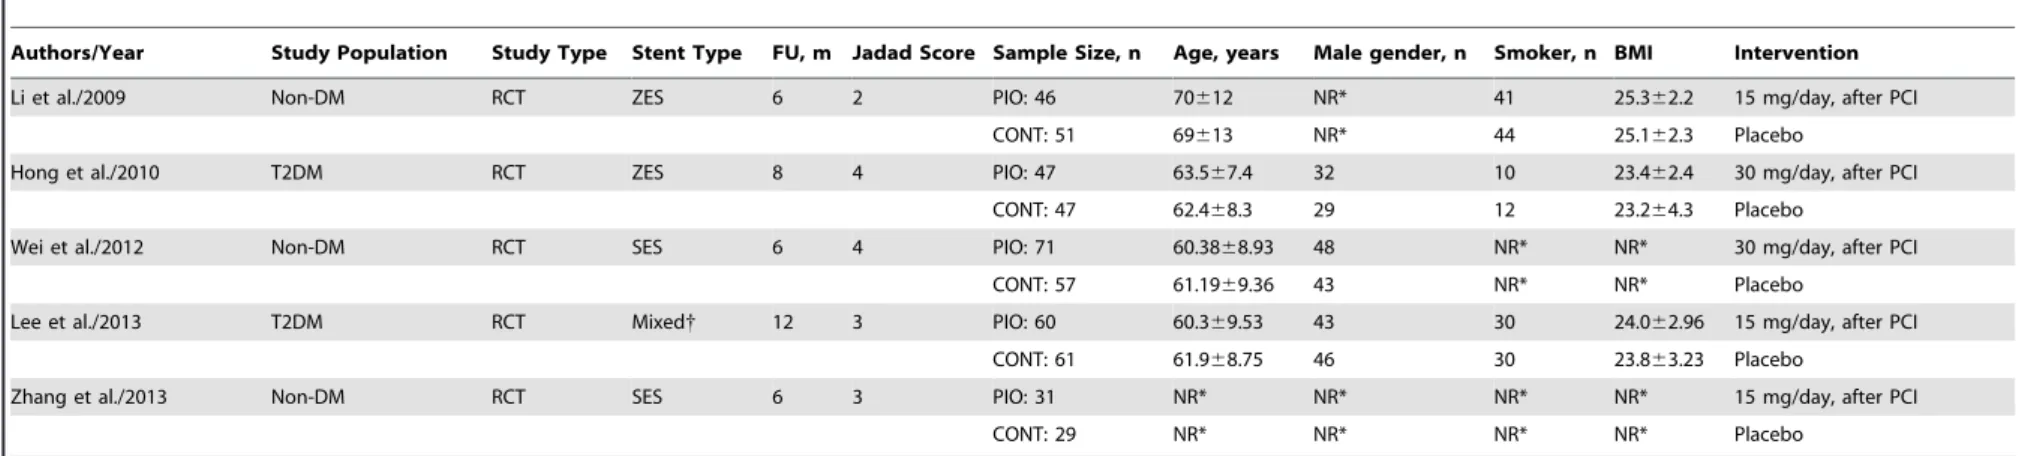 Table 1. Main Characteristics of the Studies Included in the Meta-Analysis.